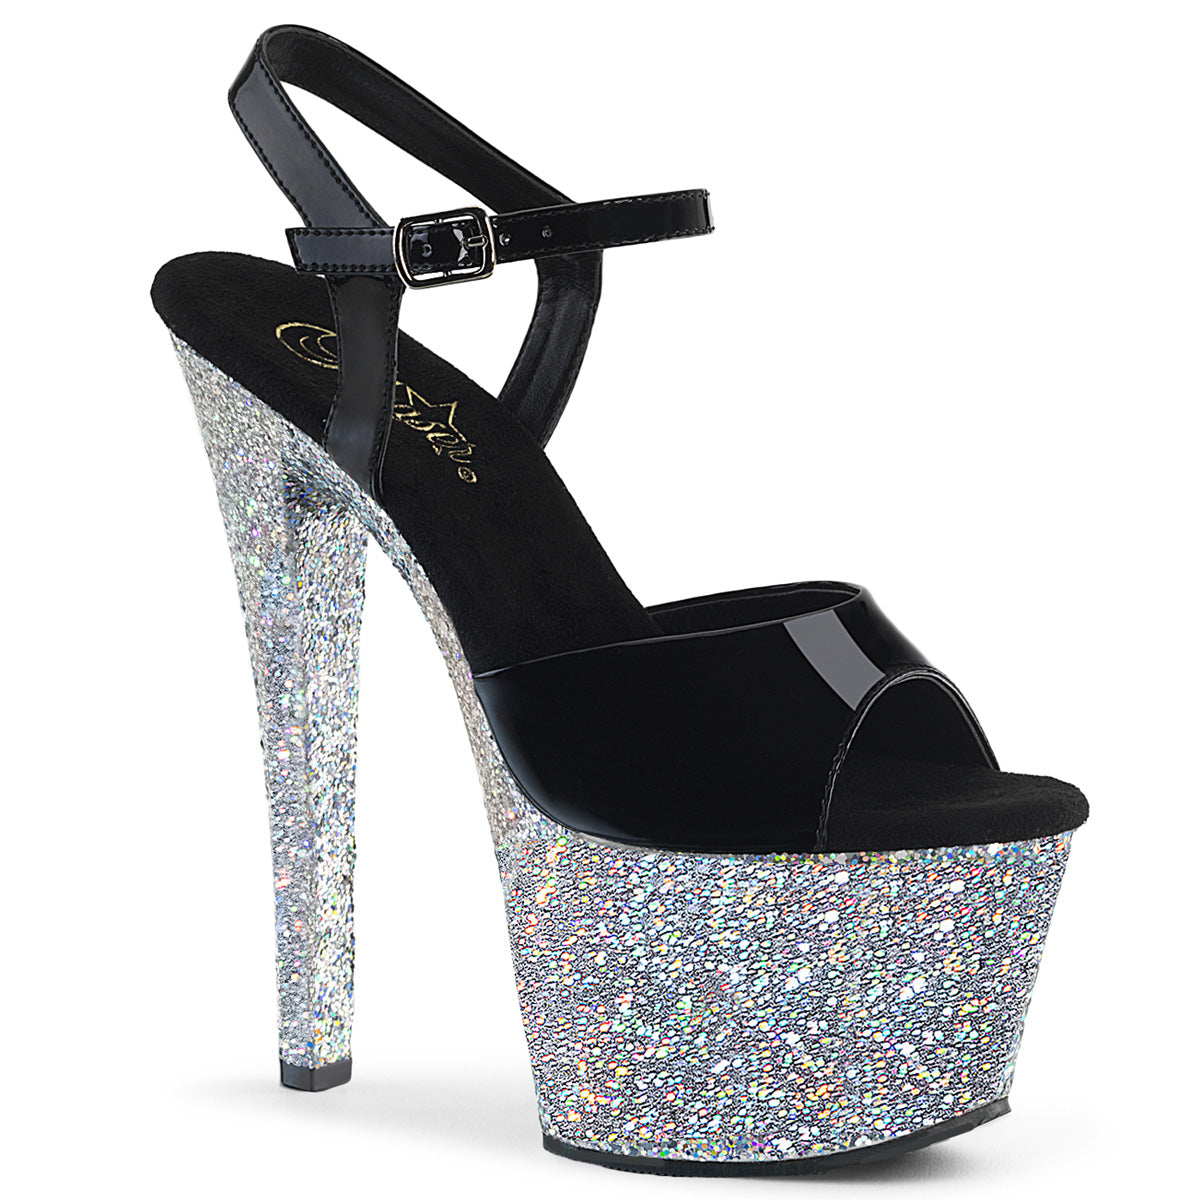 SKY-309LG Pleasers 7" Heel Black Silver Glitter Sexy Shoes